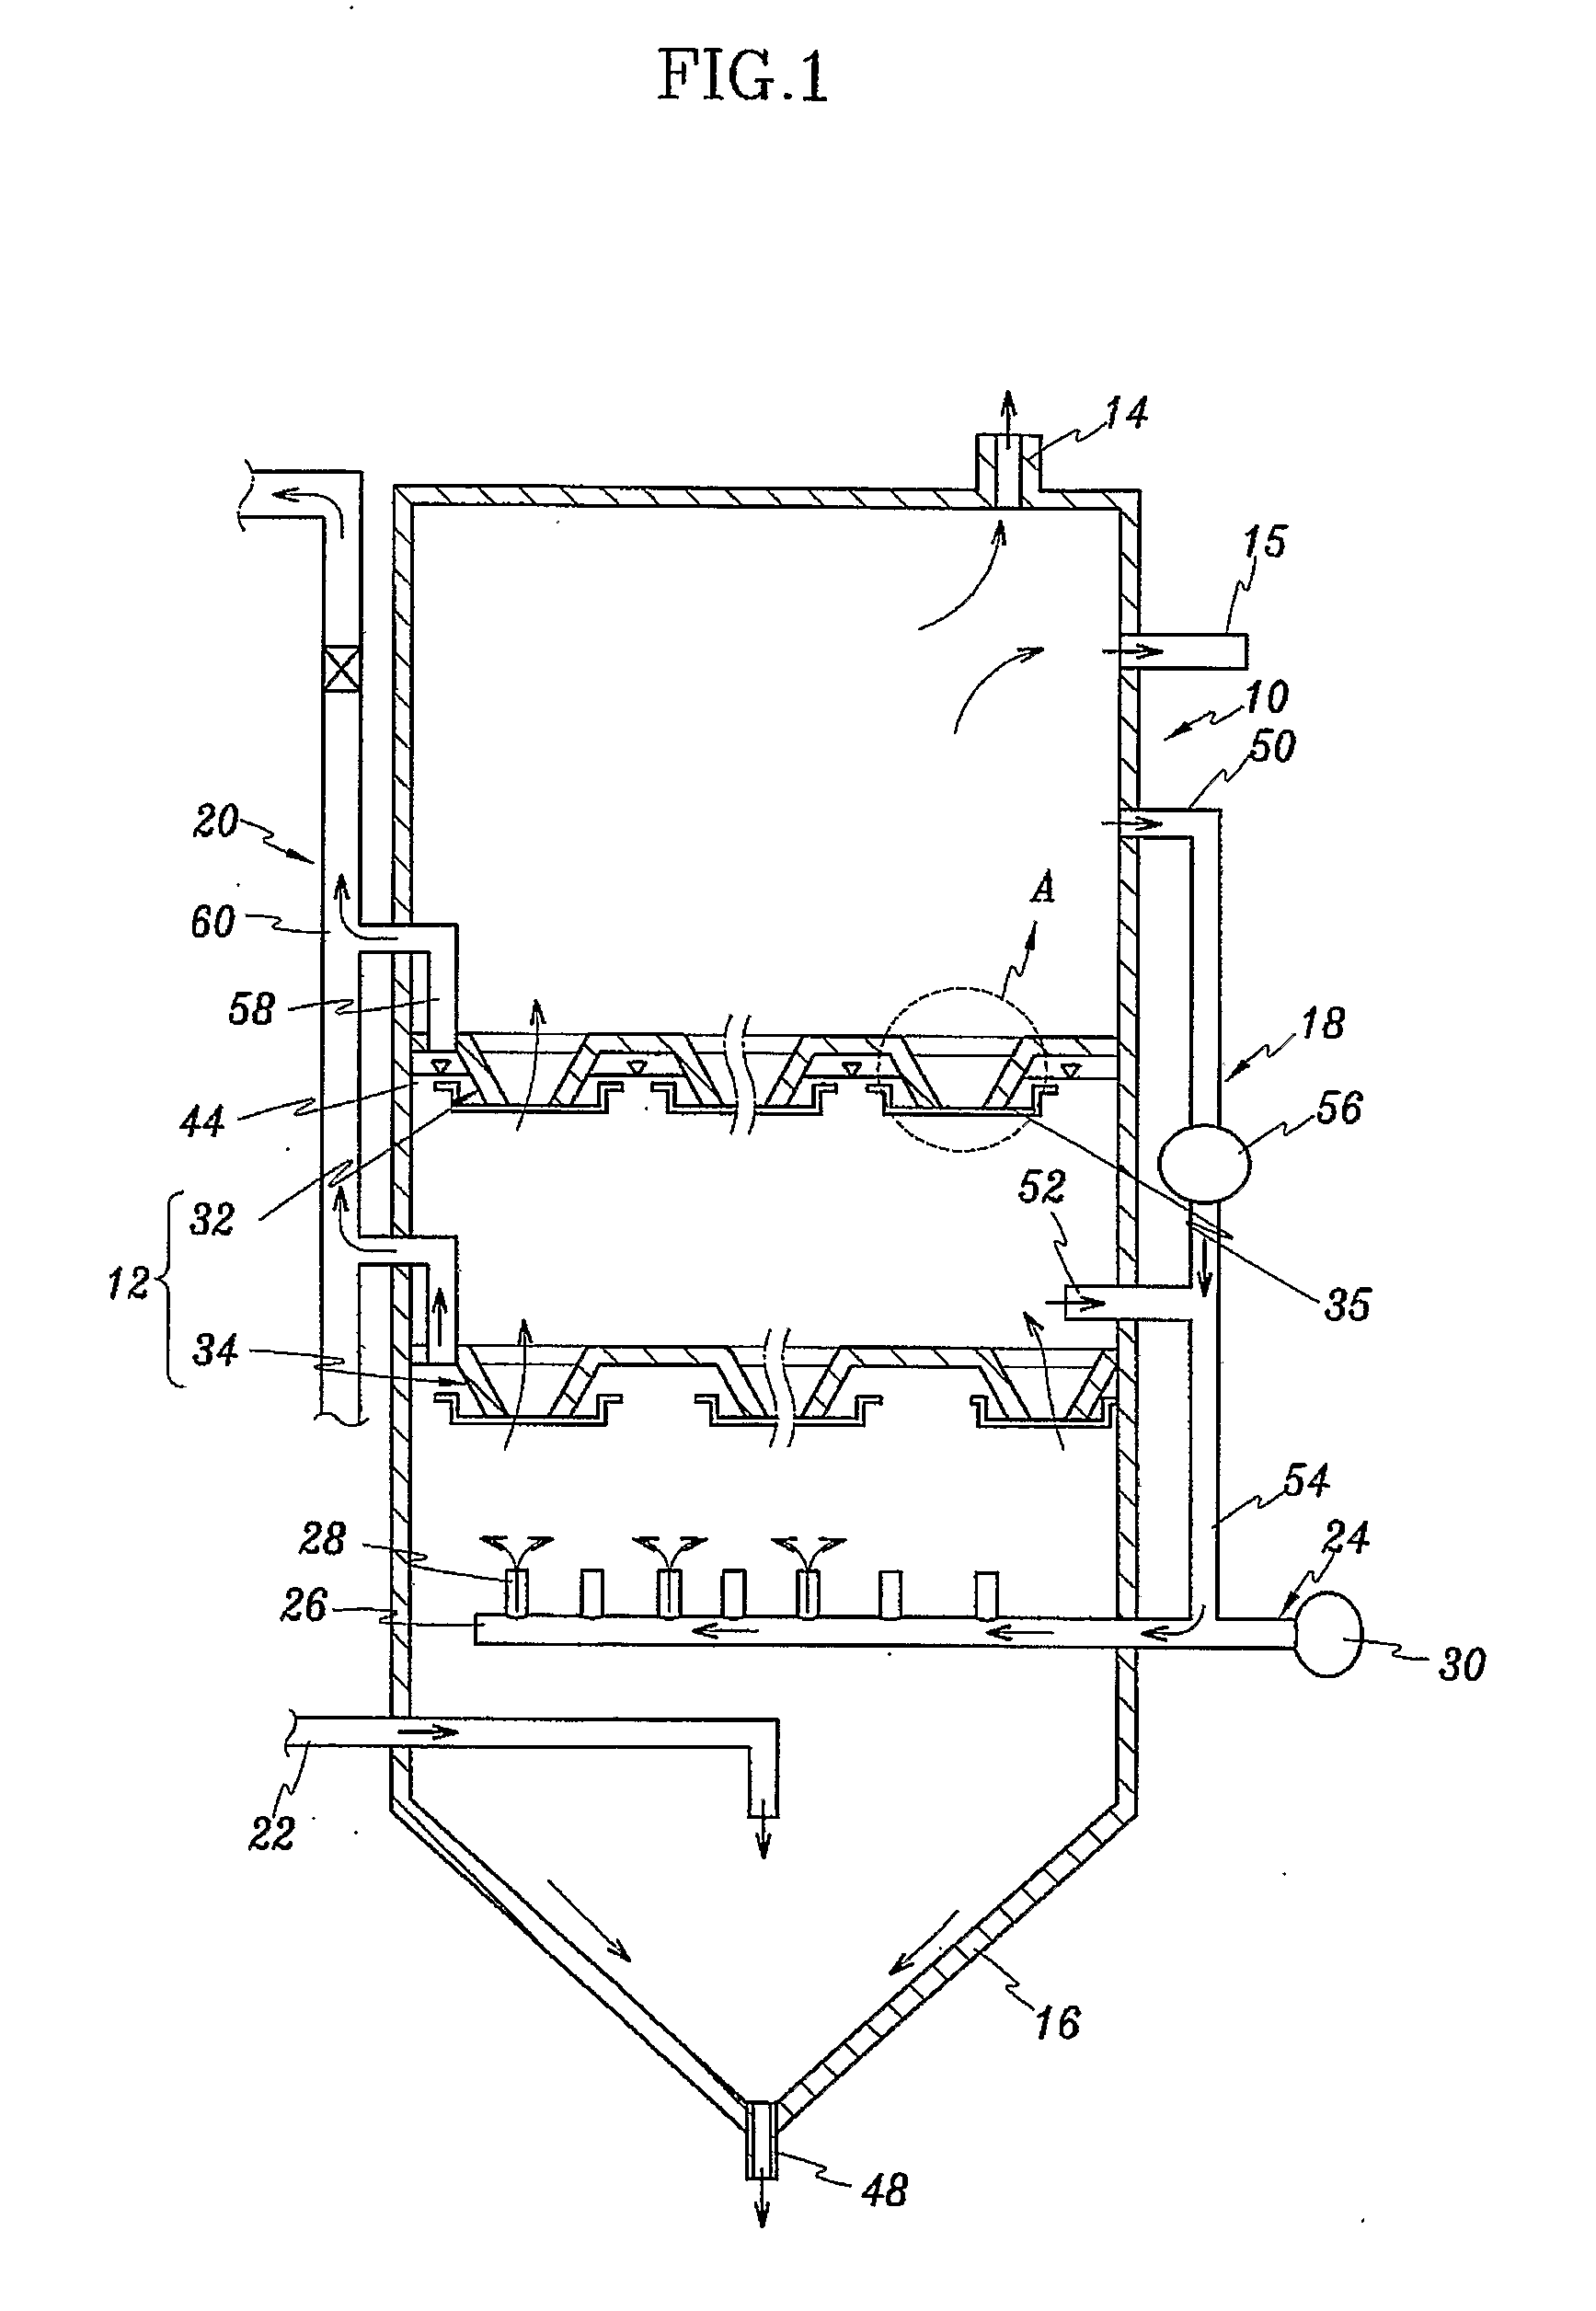 Fluids Fluxion Method and Plant for Wastewater Treatment